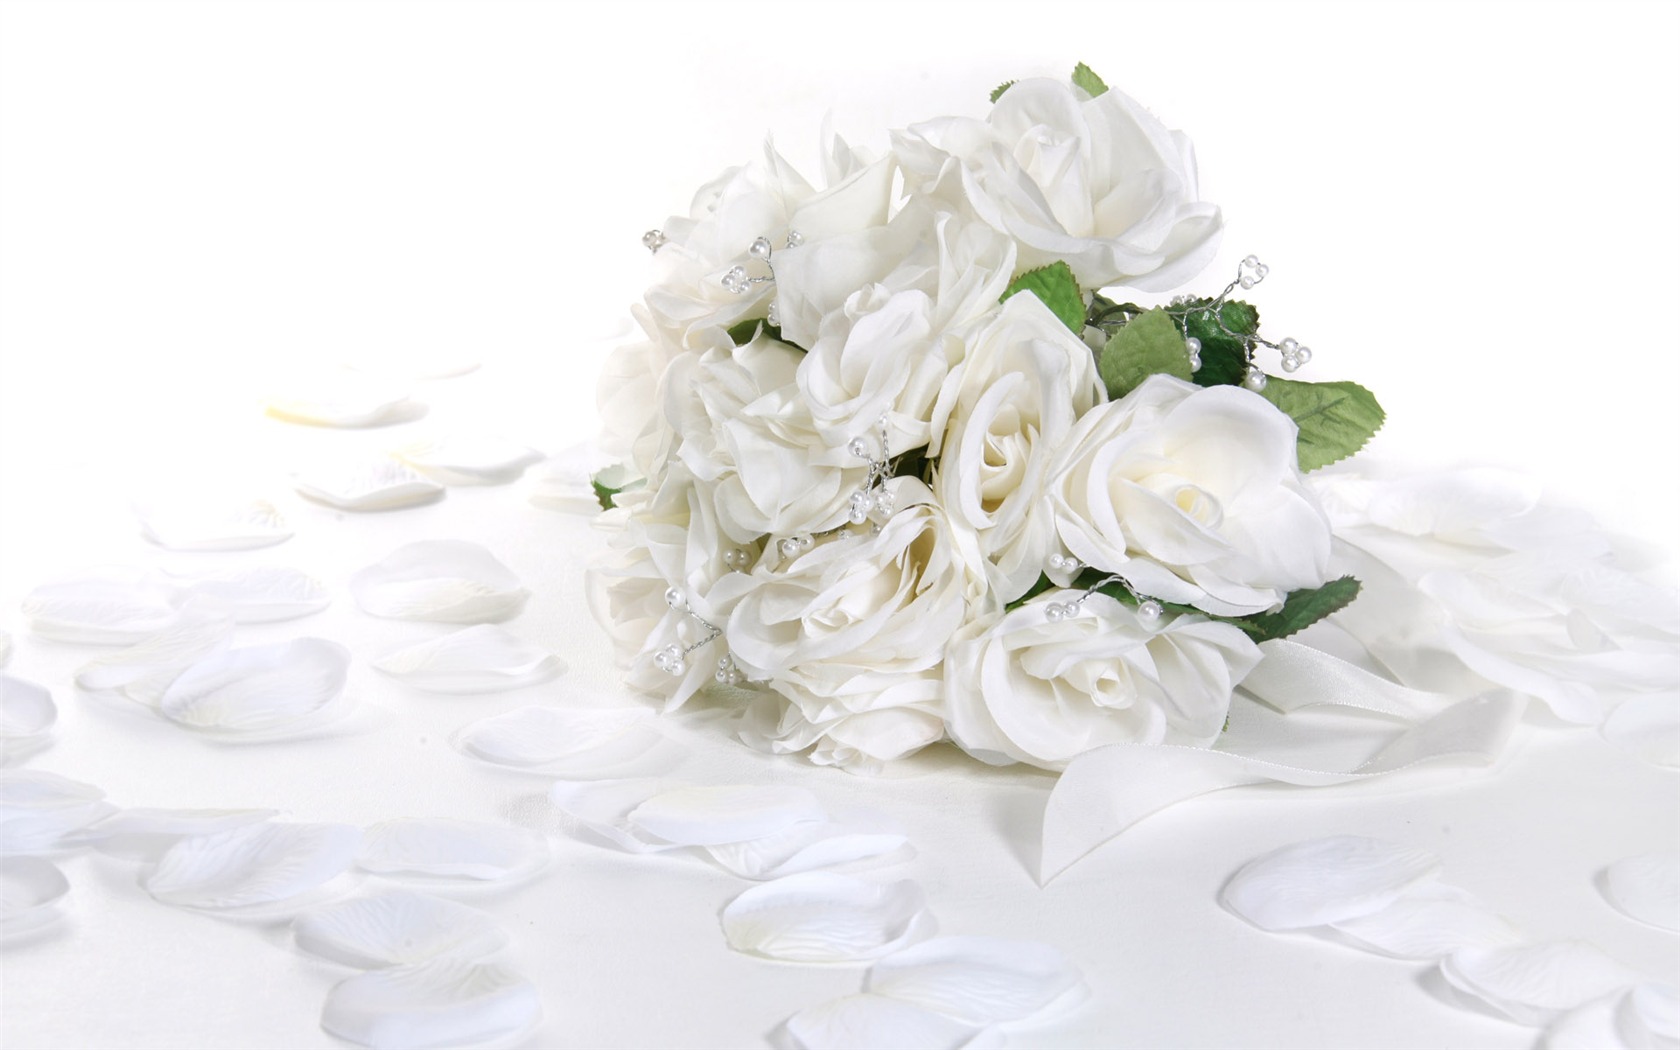 Weddings and Flowers wallpaper (2) #2 - 1680x1050